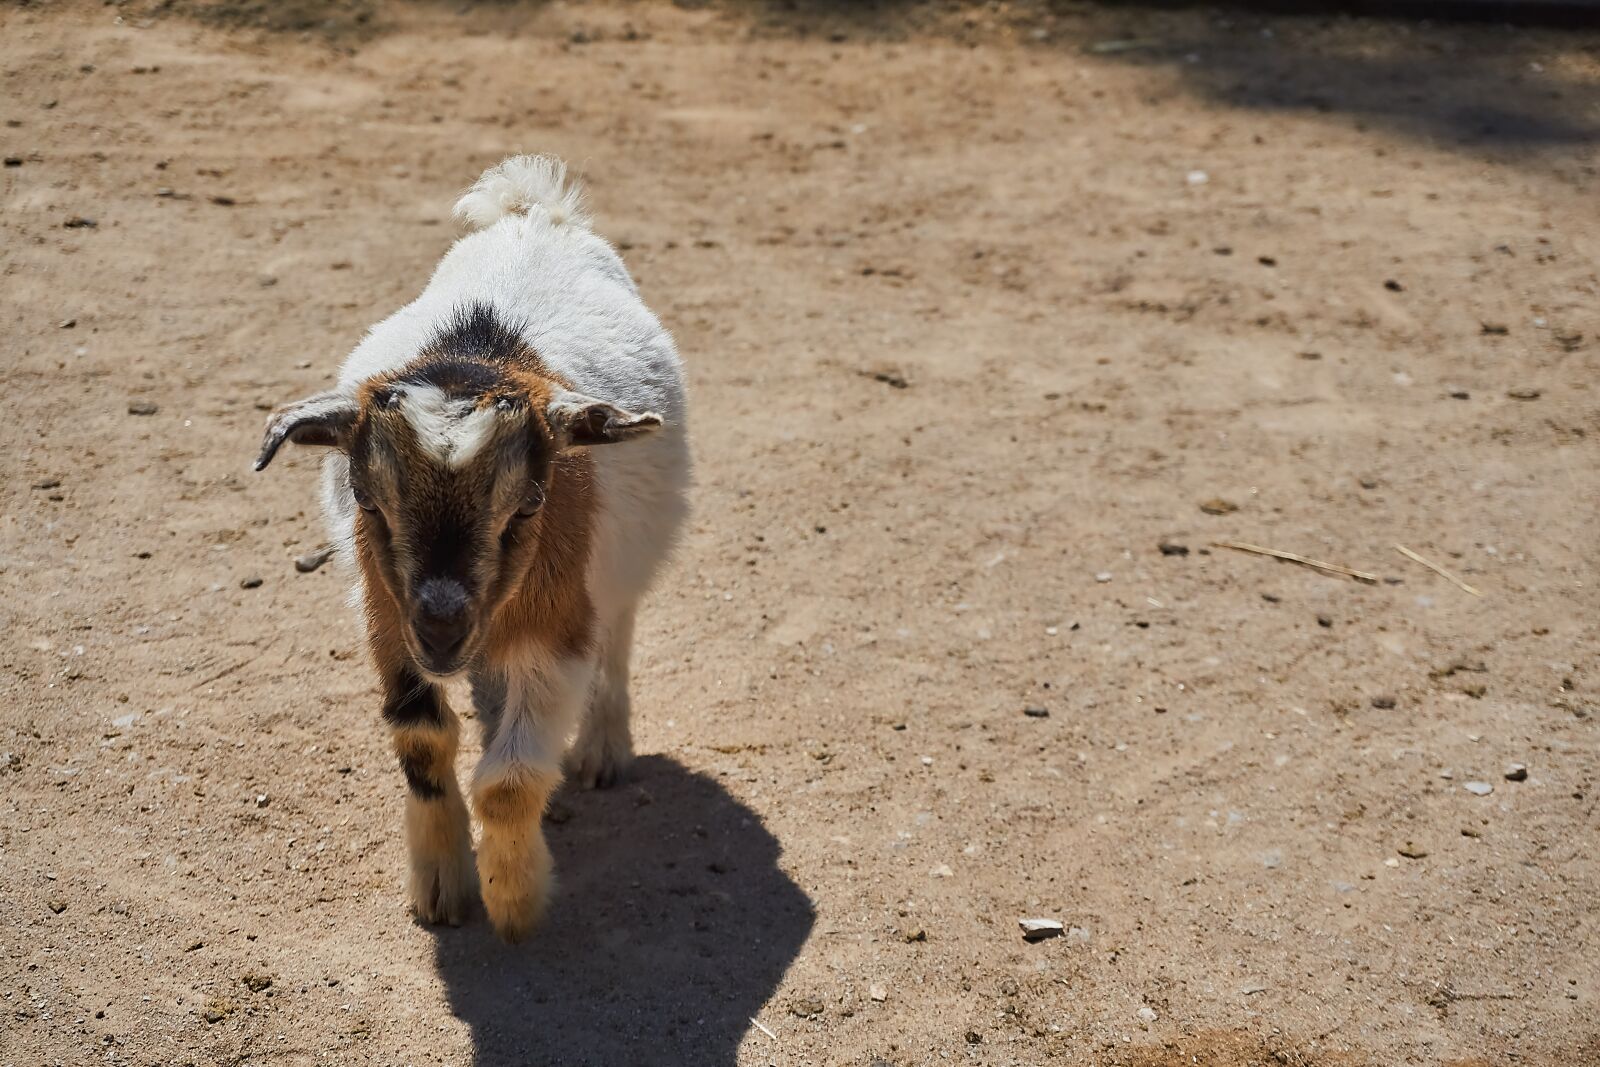 Sony a6000 + Sony E PZ 16-50 mm F3.5-5.6 OSS (SELP1650) sample photo. Goat, petting zoo, animal photography